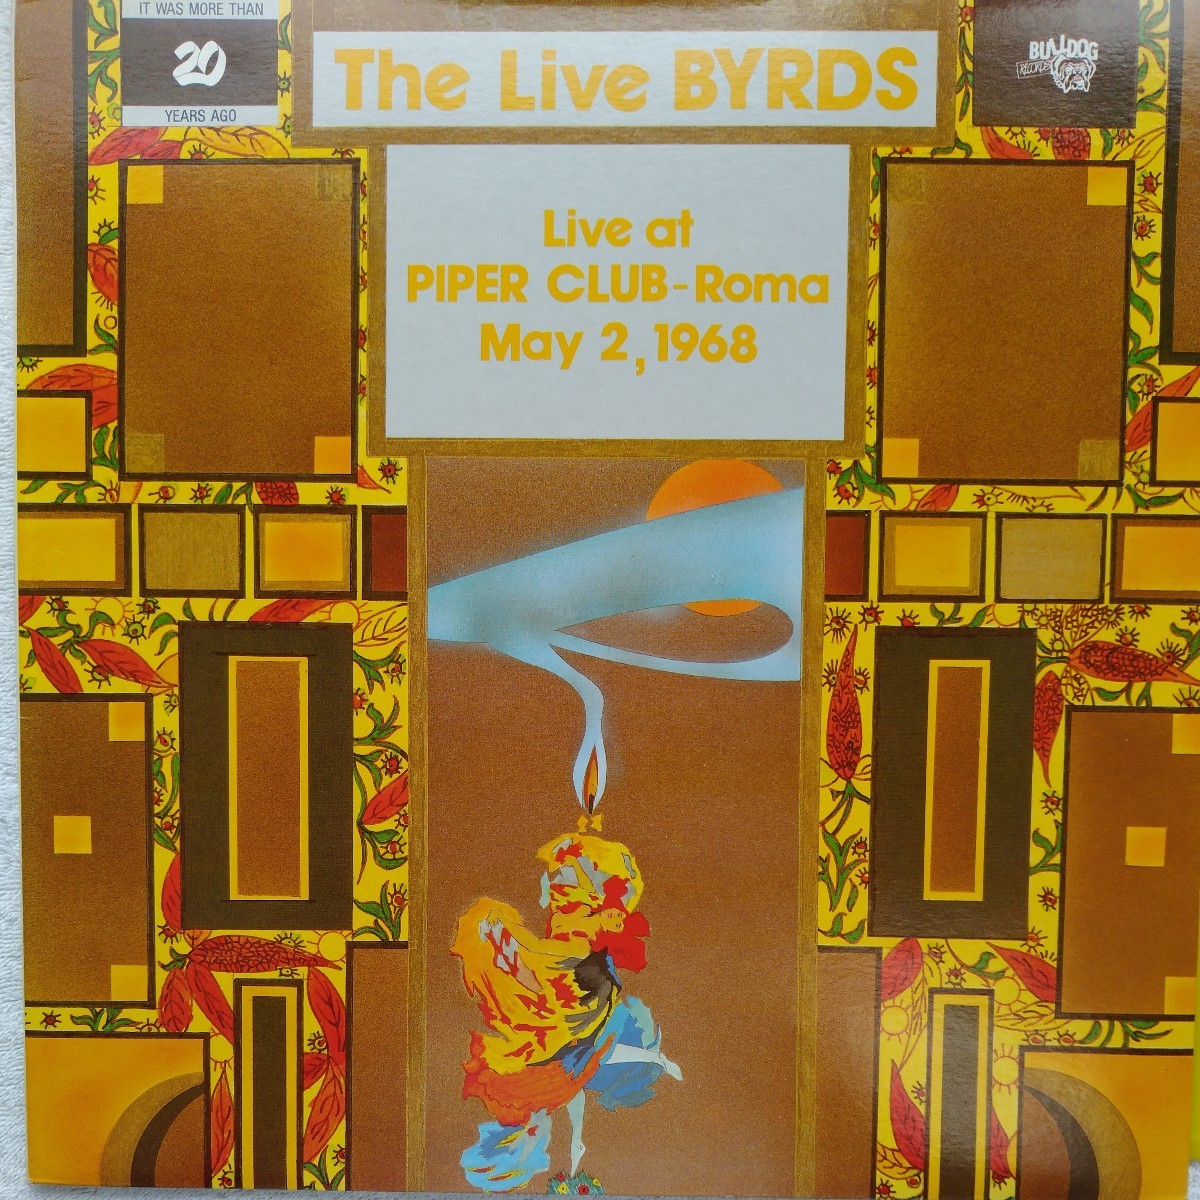 the byrds バーズ ライブ live at piper club analog record vinly レコード アナログ LP_画像2